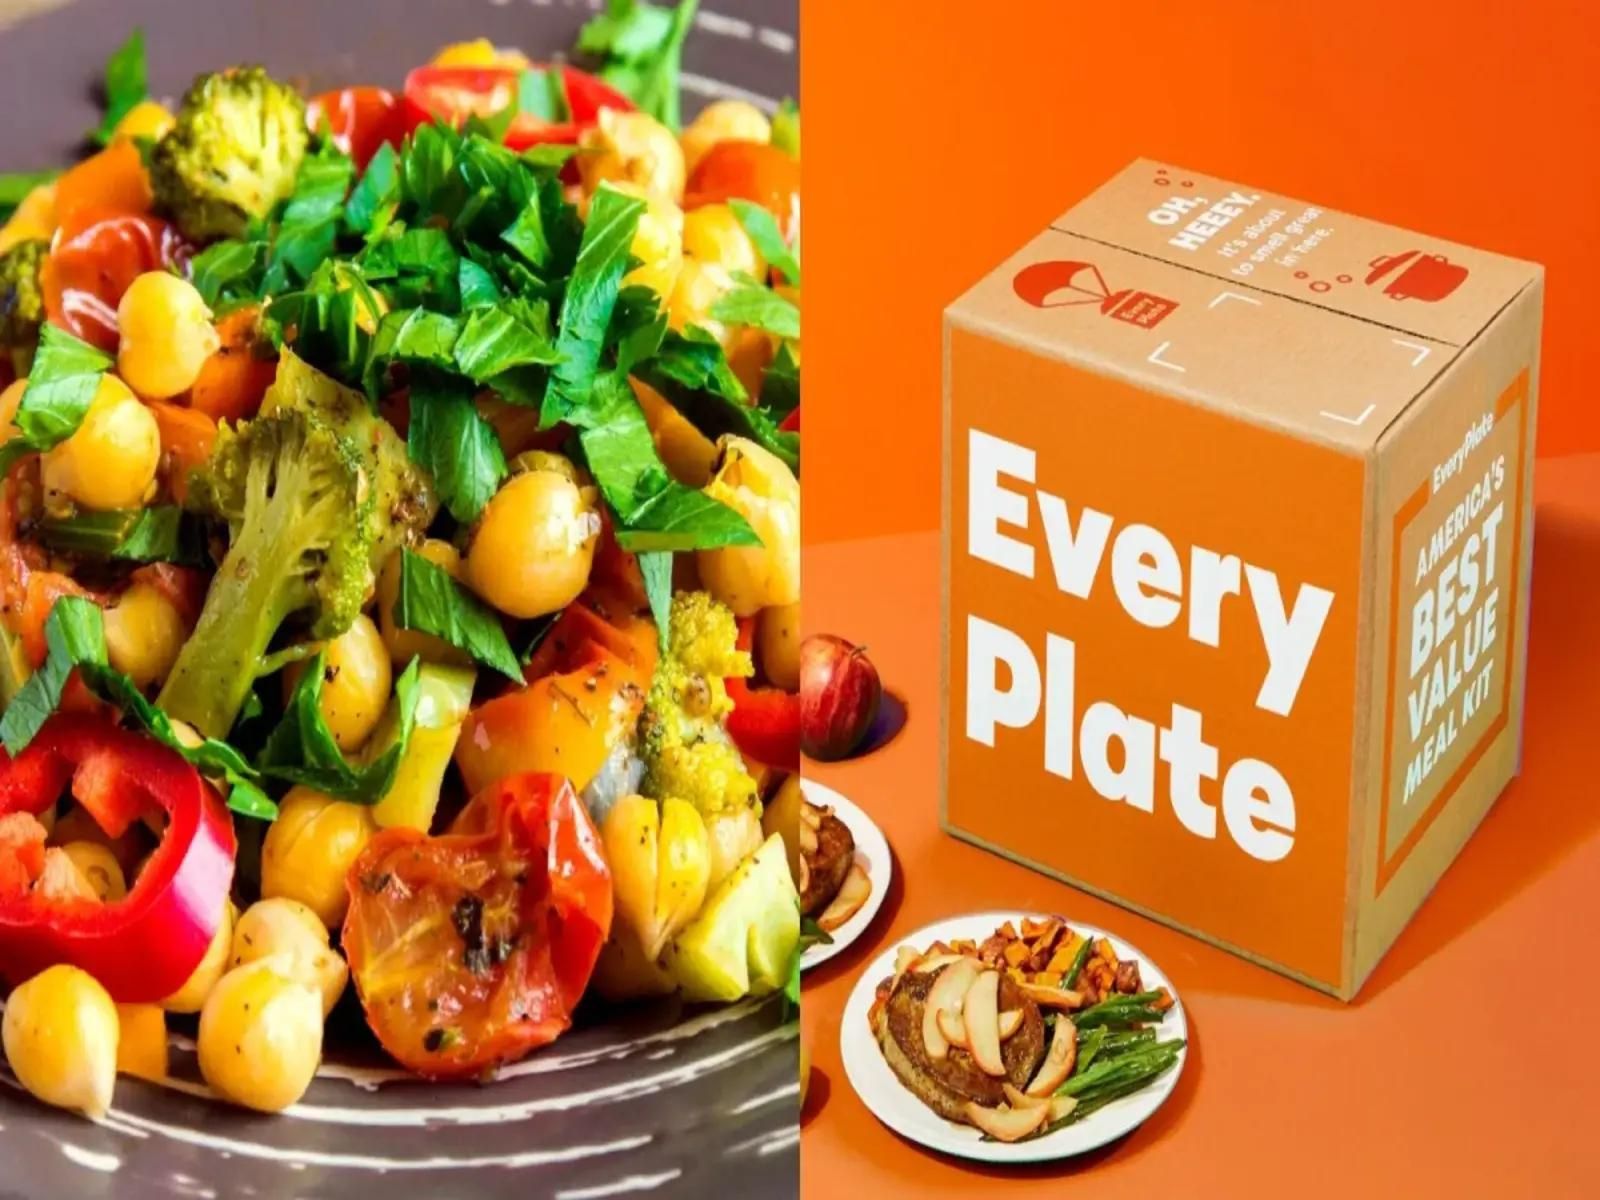 15-everyplate-nutrition-facts